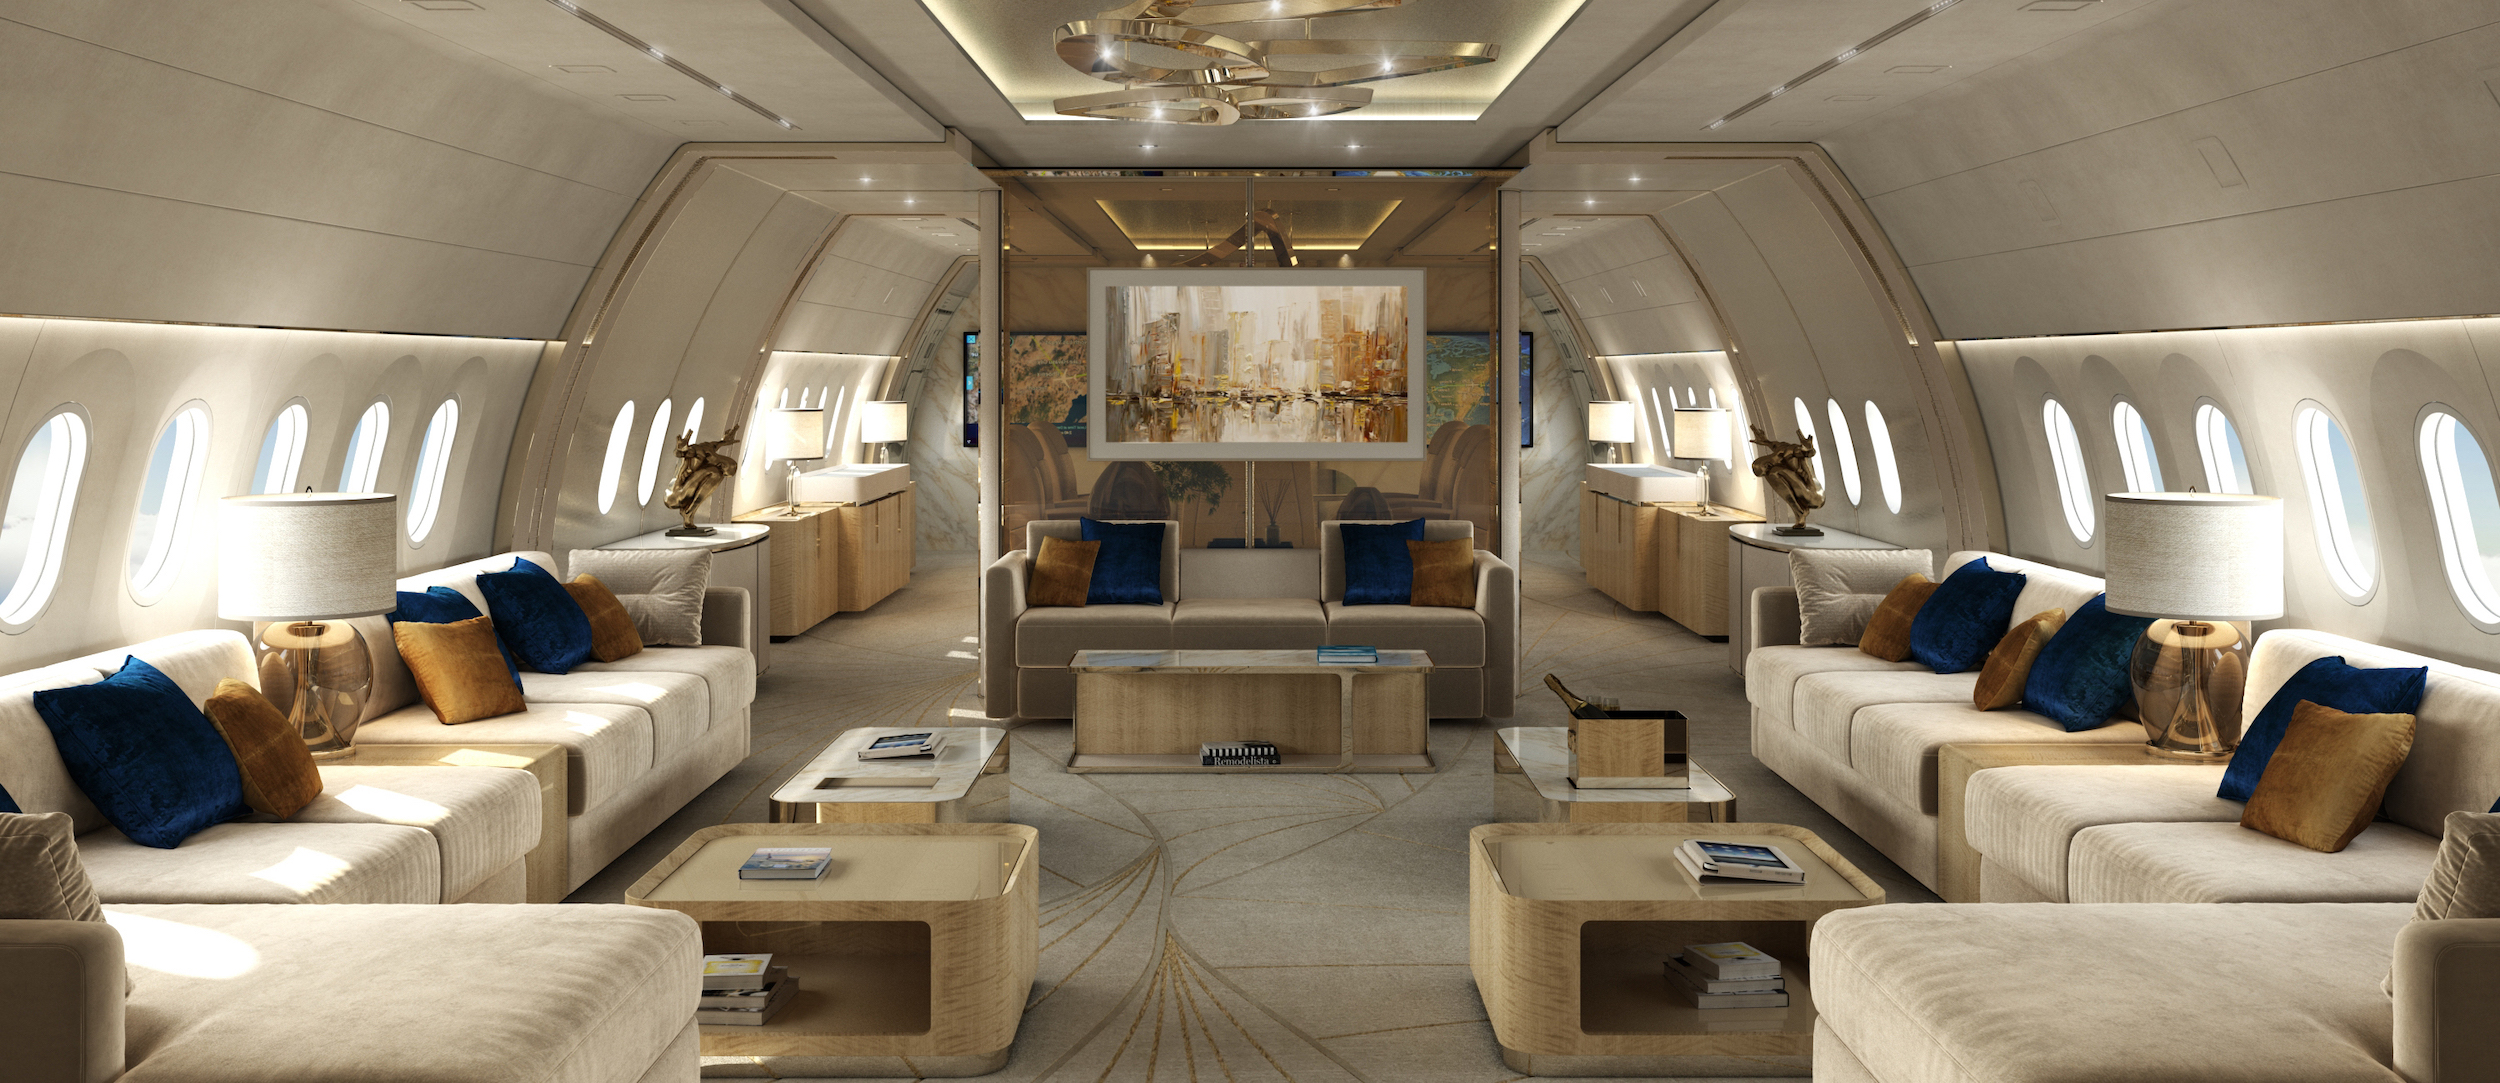 See 4 Private Jets With The Most Advanced Interior Design